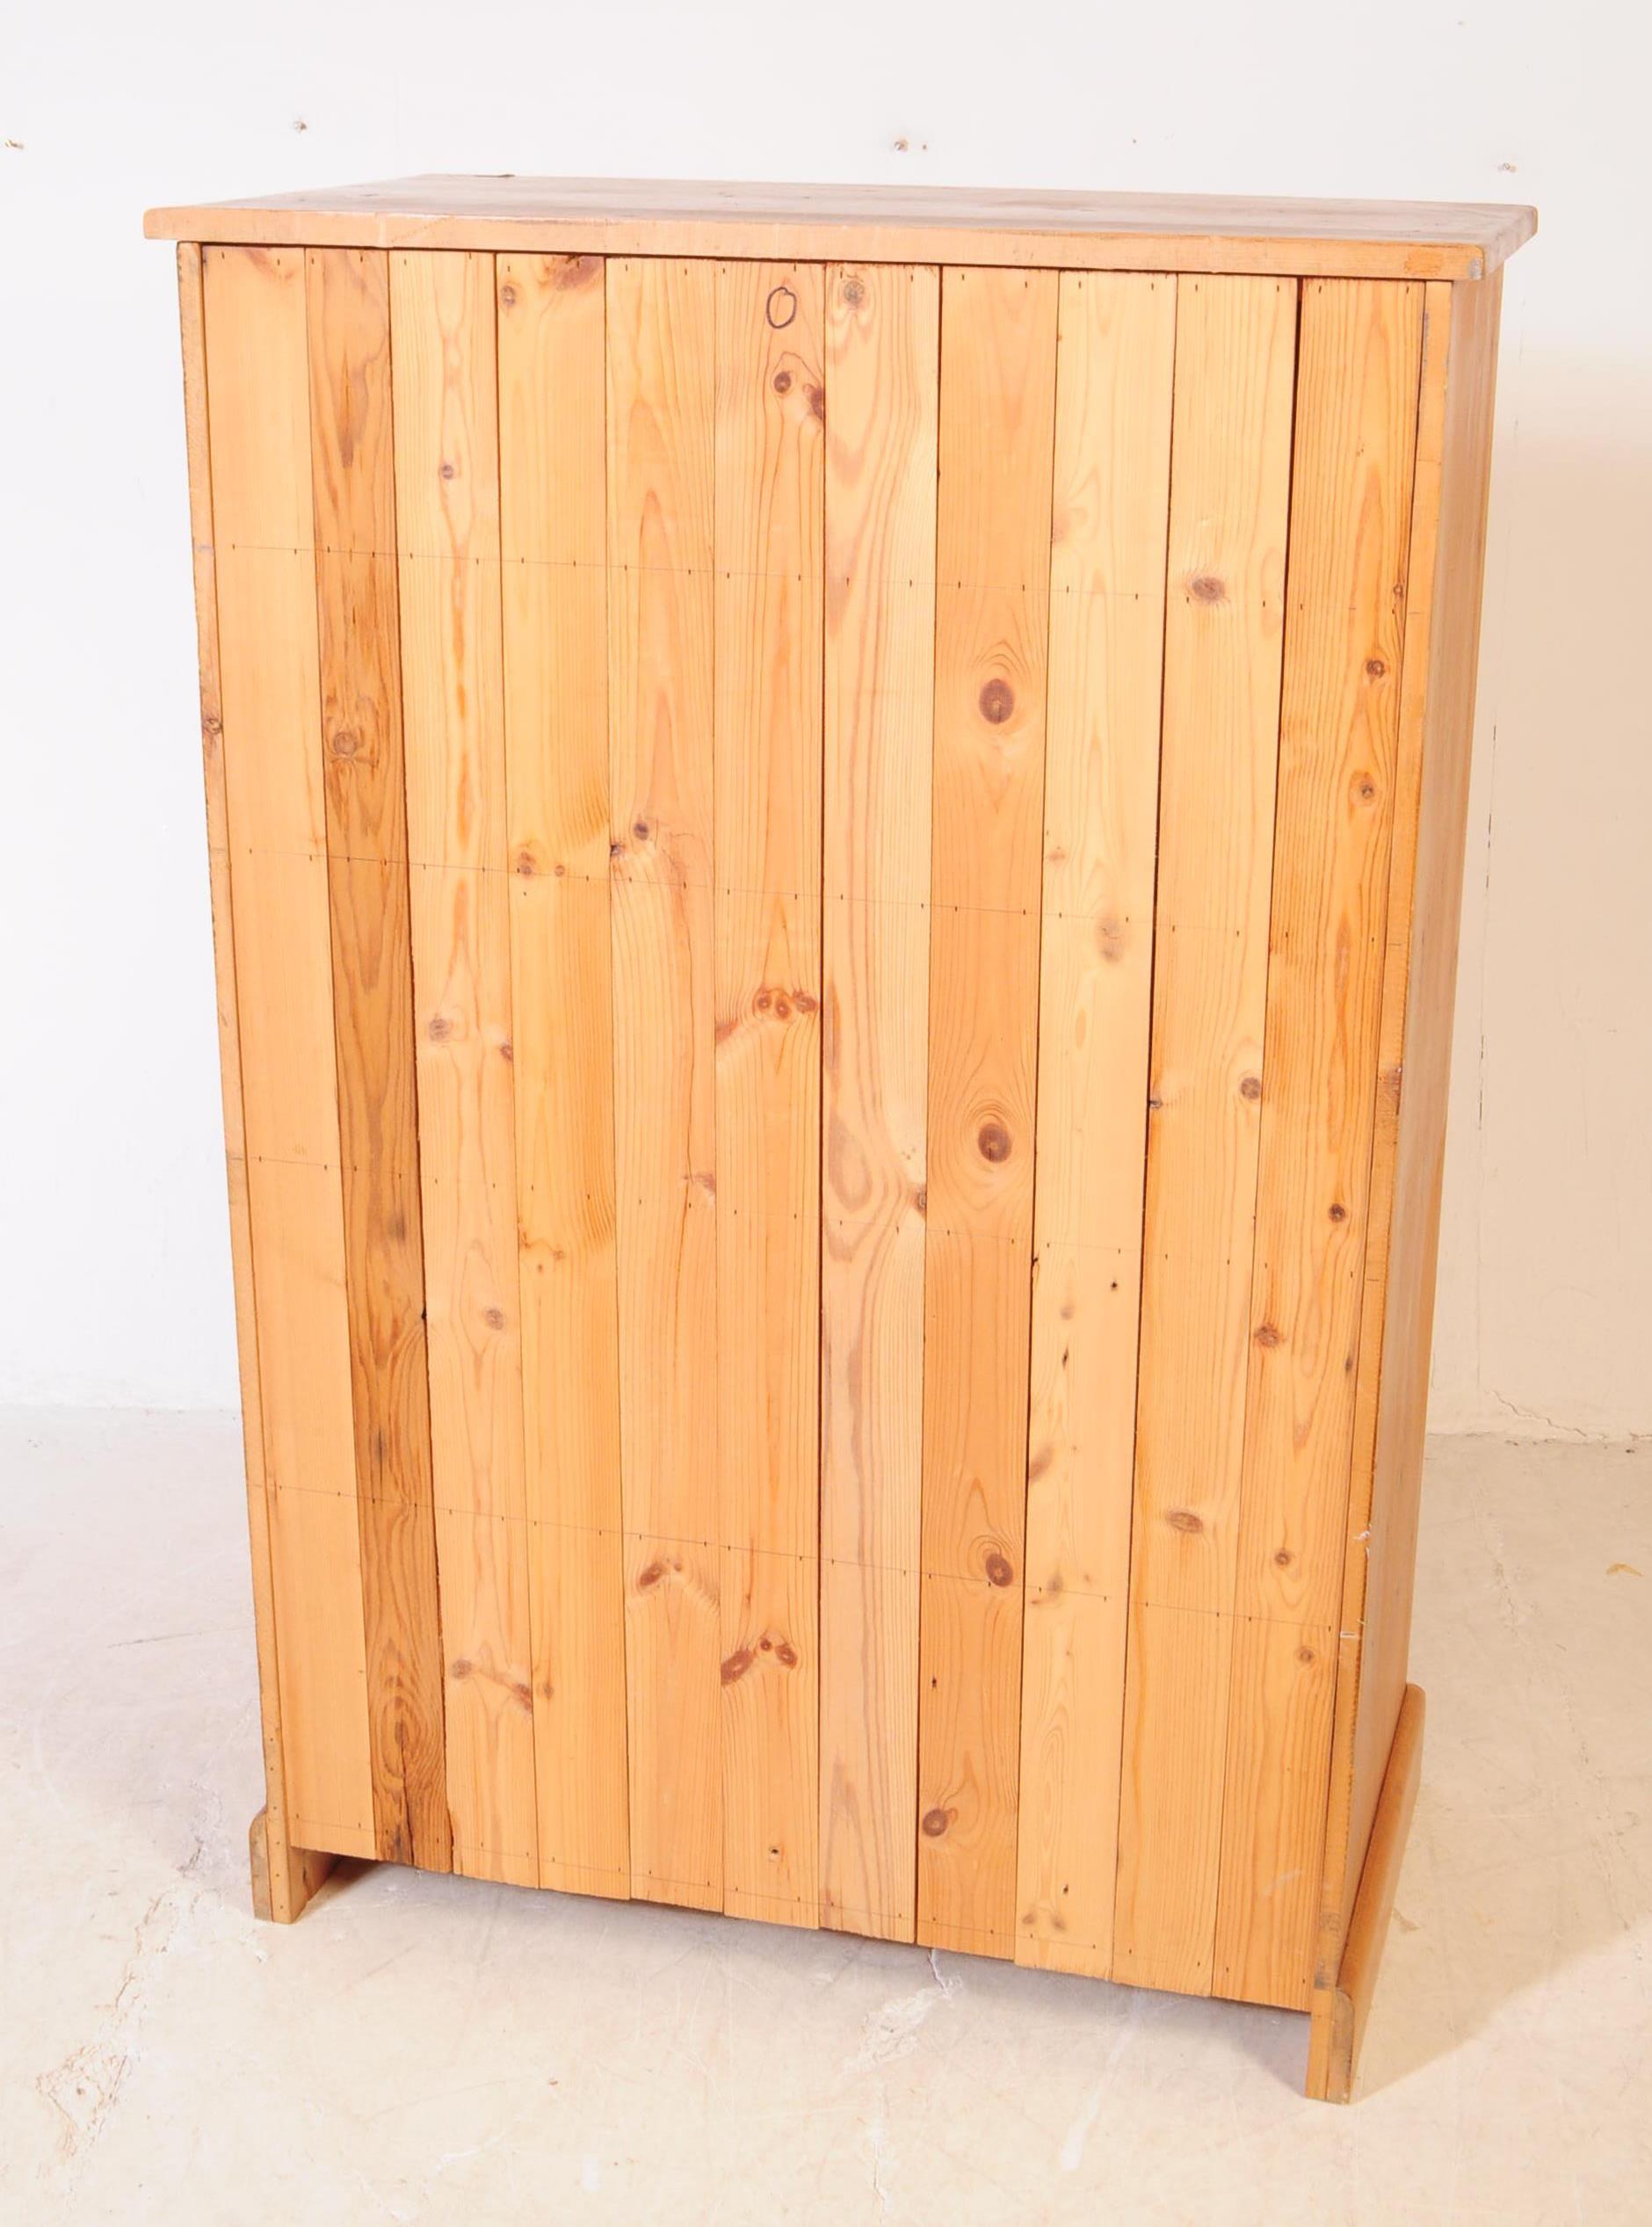 CONTEMPORARY COUNTRY PINE PEDESTAL CHEST OF DRAWERS - Image 4 of 5